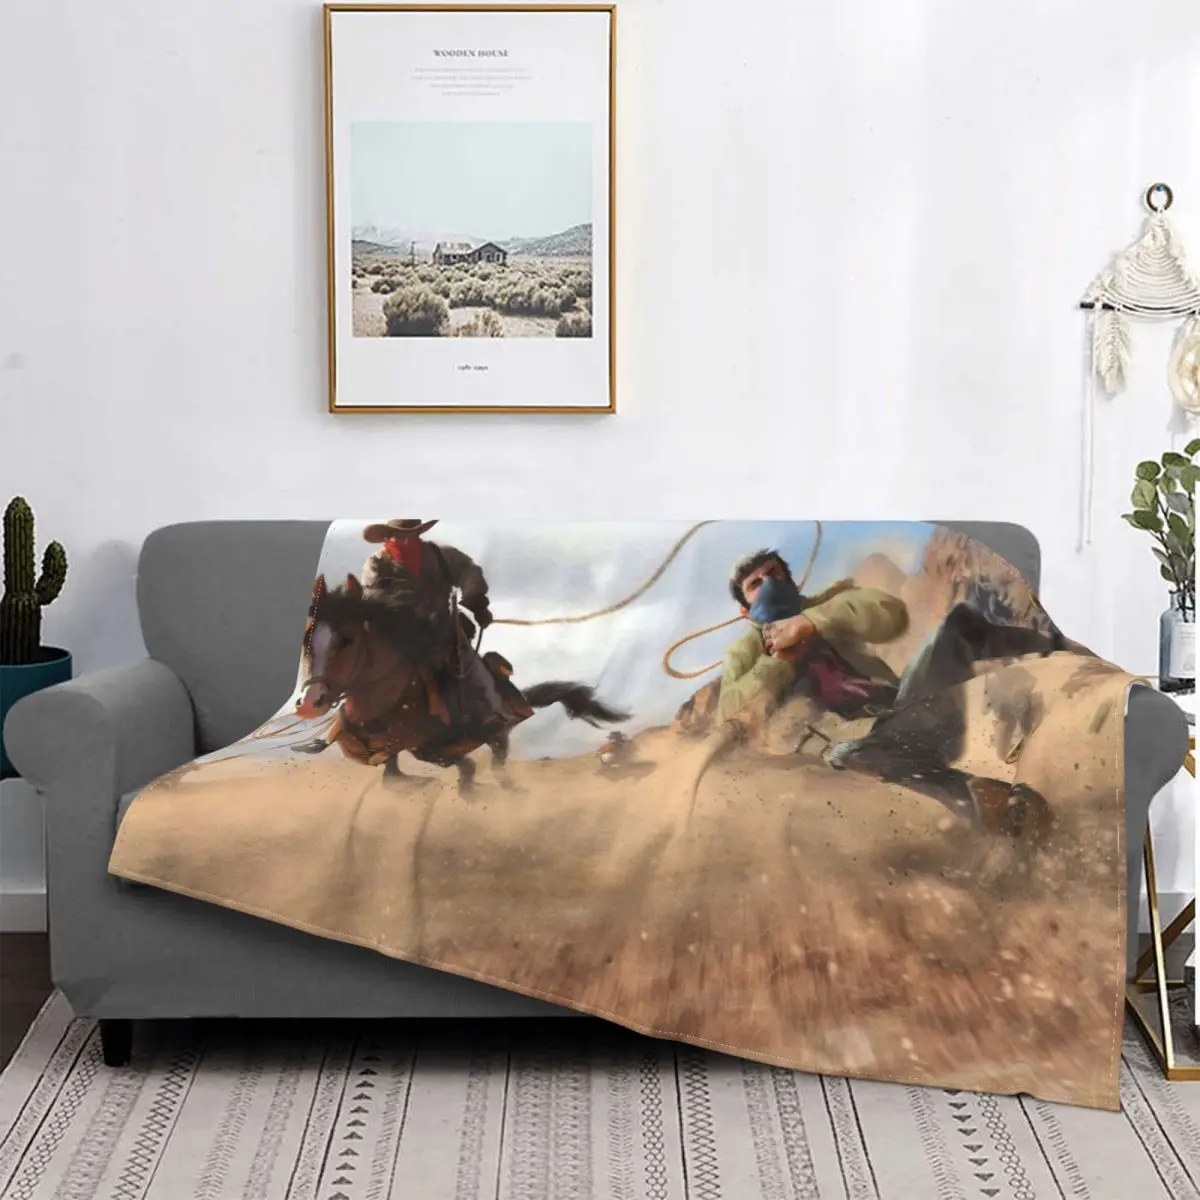 

Red Dead Redemption John Marston Game Being Strangled Portable Warm Throw Blankets for Bedding Travel